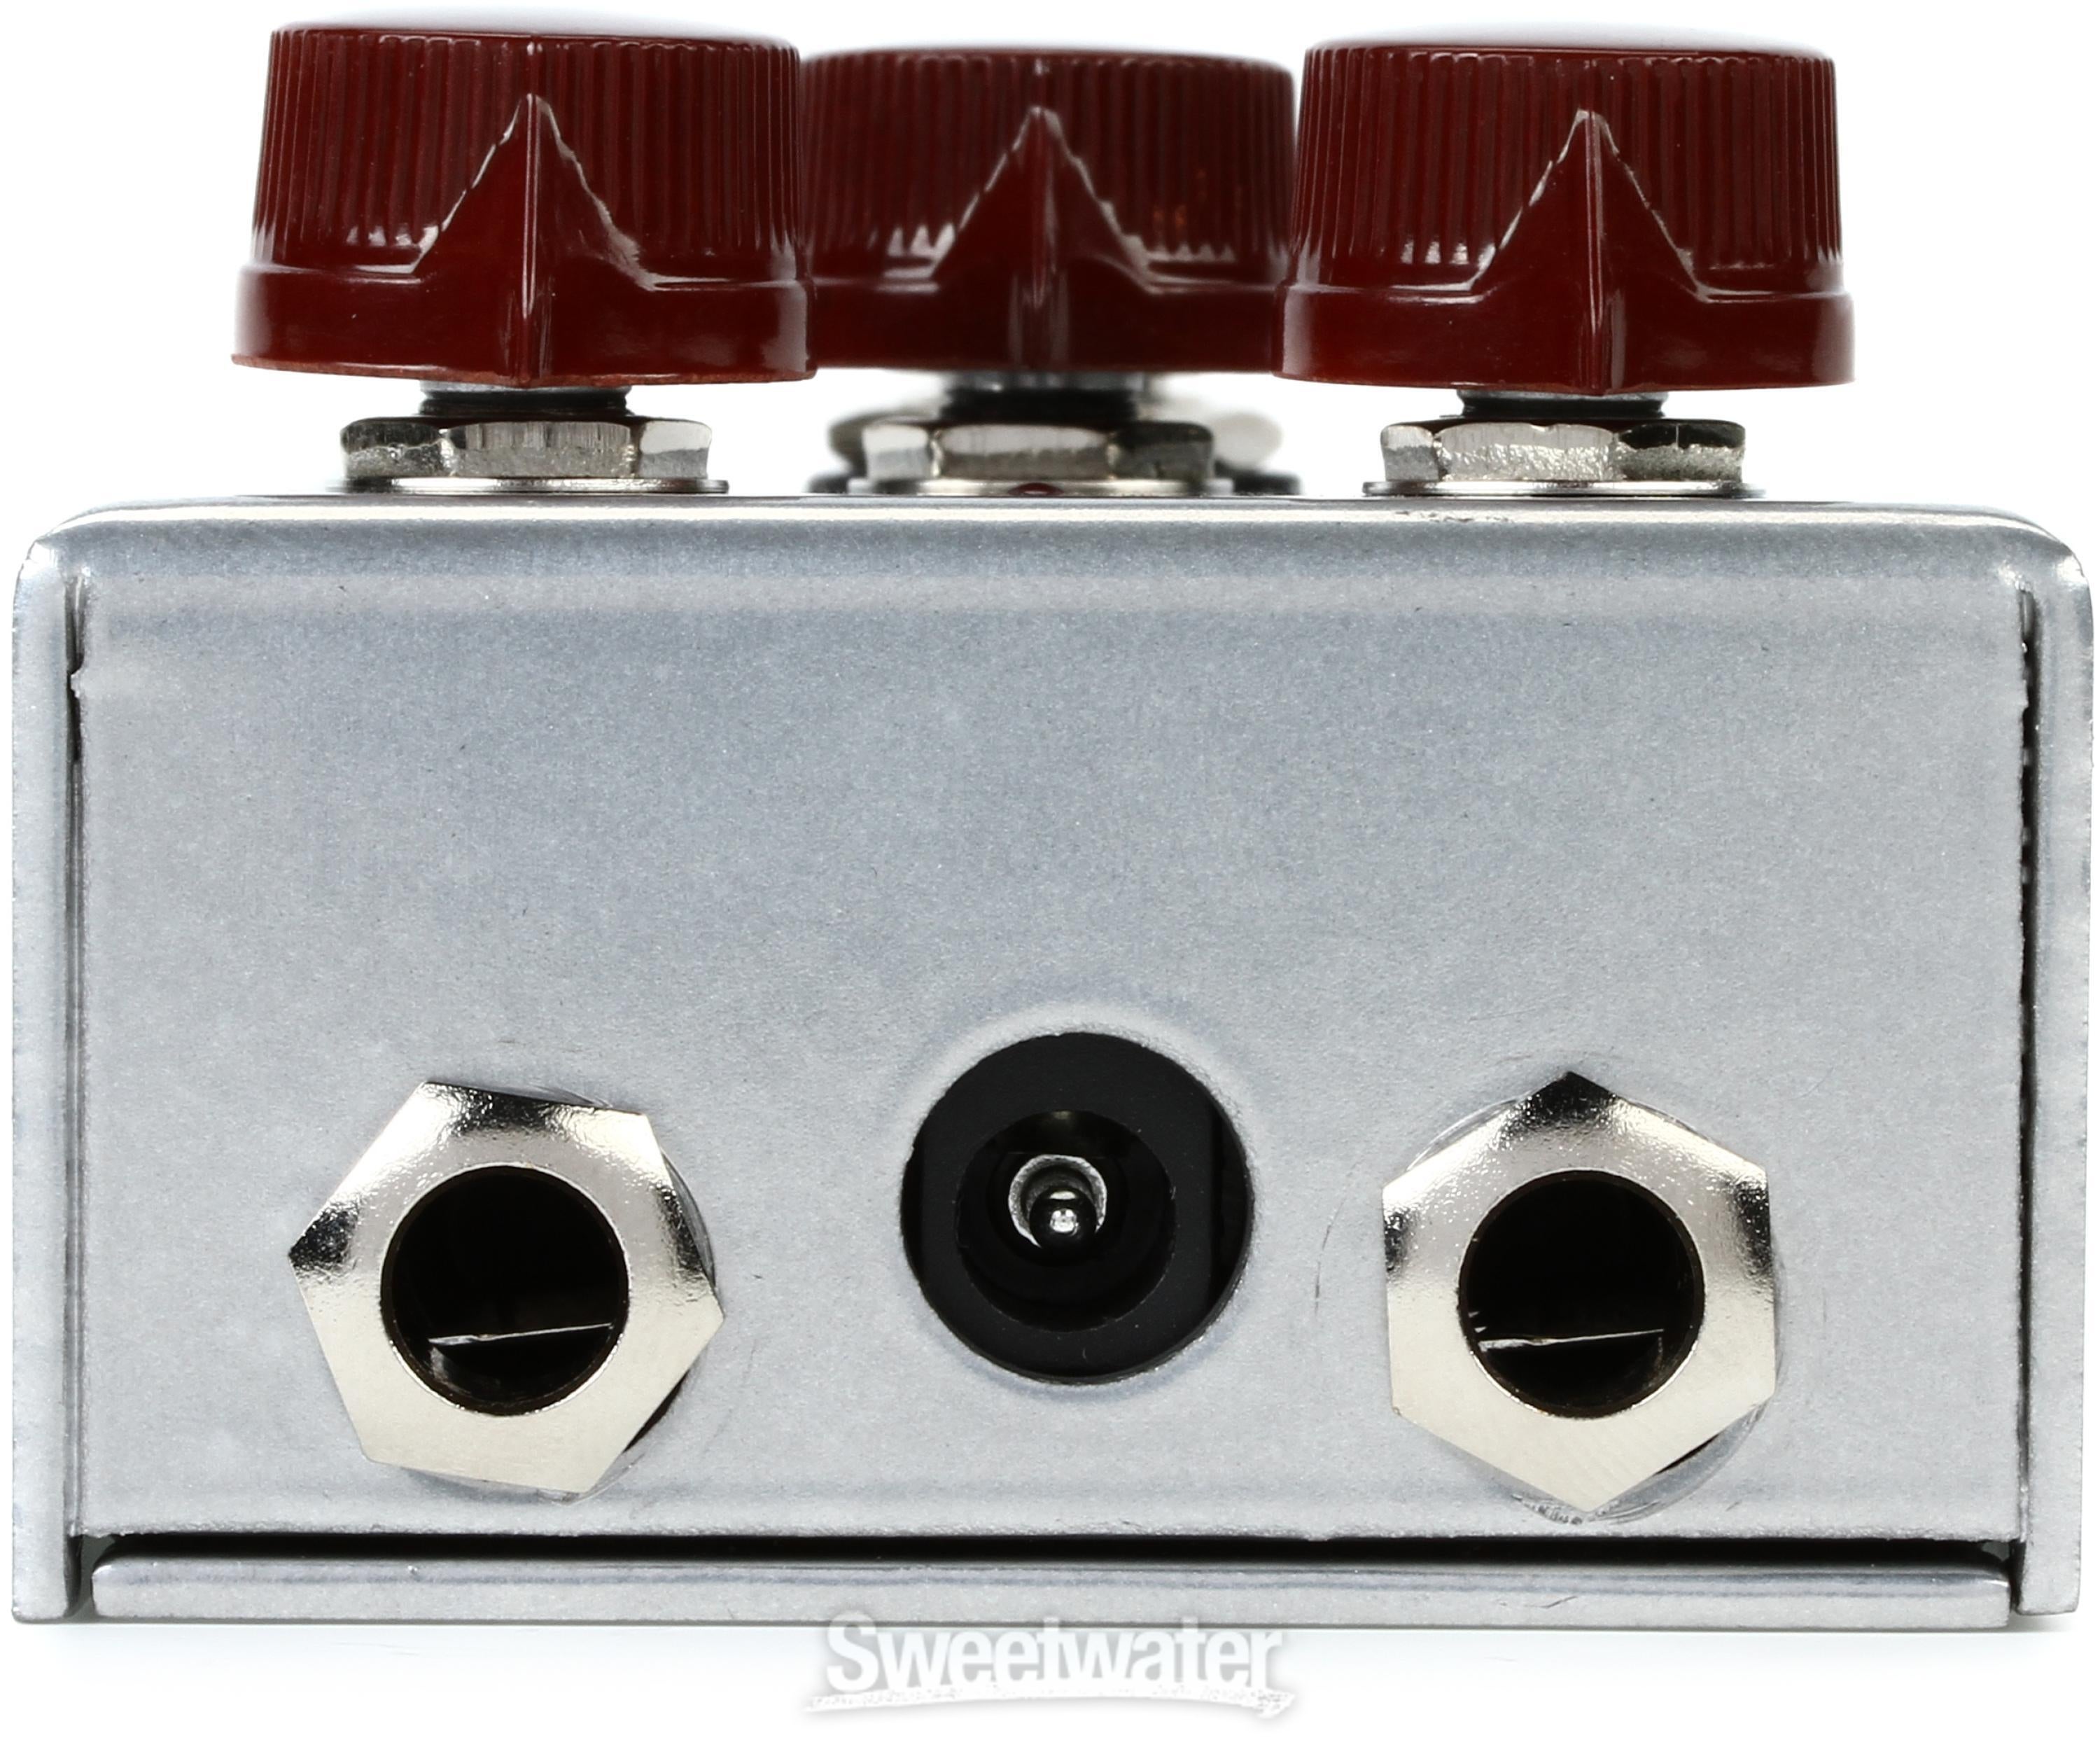 J. Rockett Audio Designs Archer Boost/Overdrive Pedal | Sweetwater